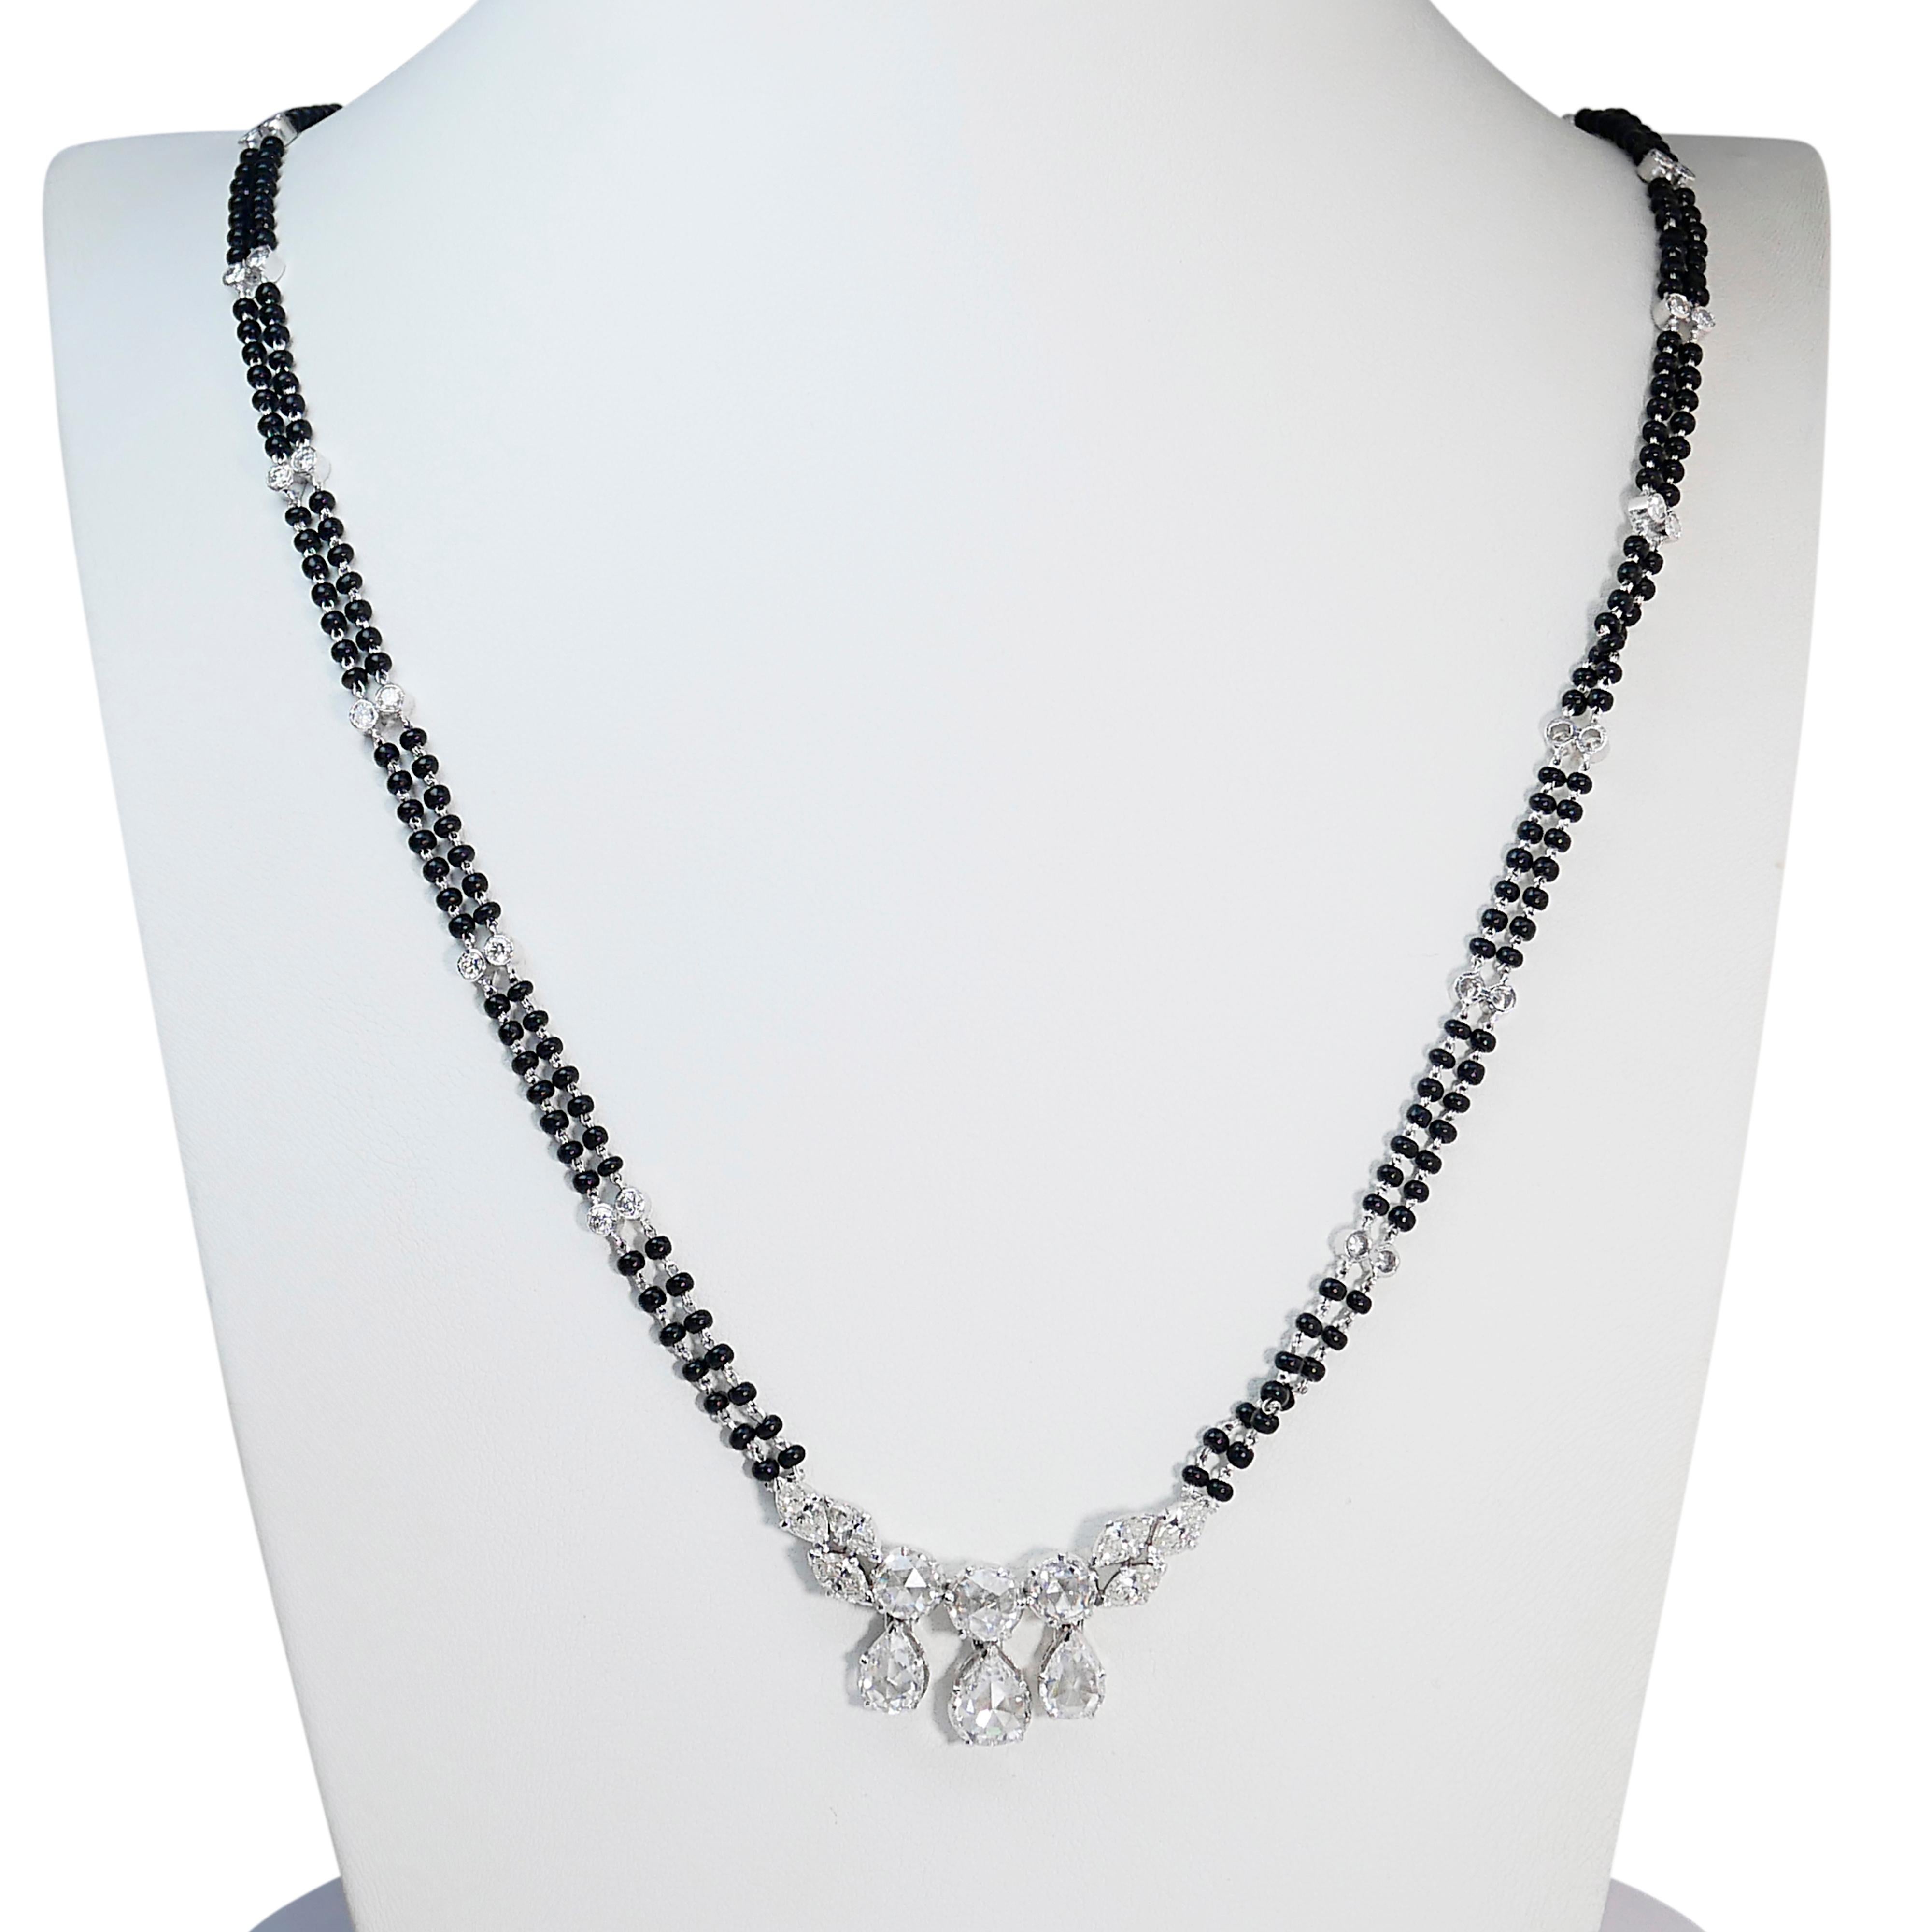 Glamorous 8.02 ct Onyx and Diamond Necklace in 18k White Gold - IGI Certified In New Condition For Sale In רמת גן, IL